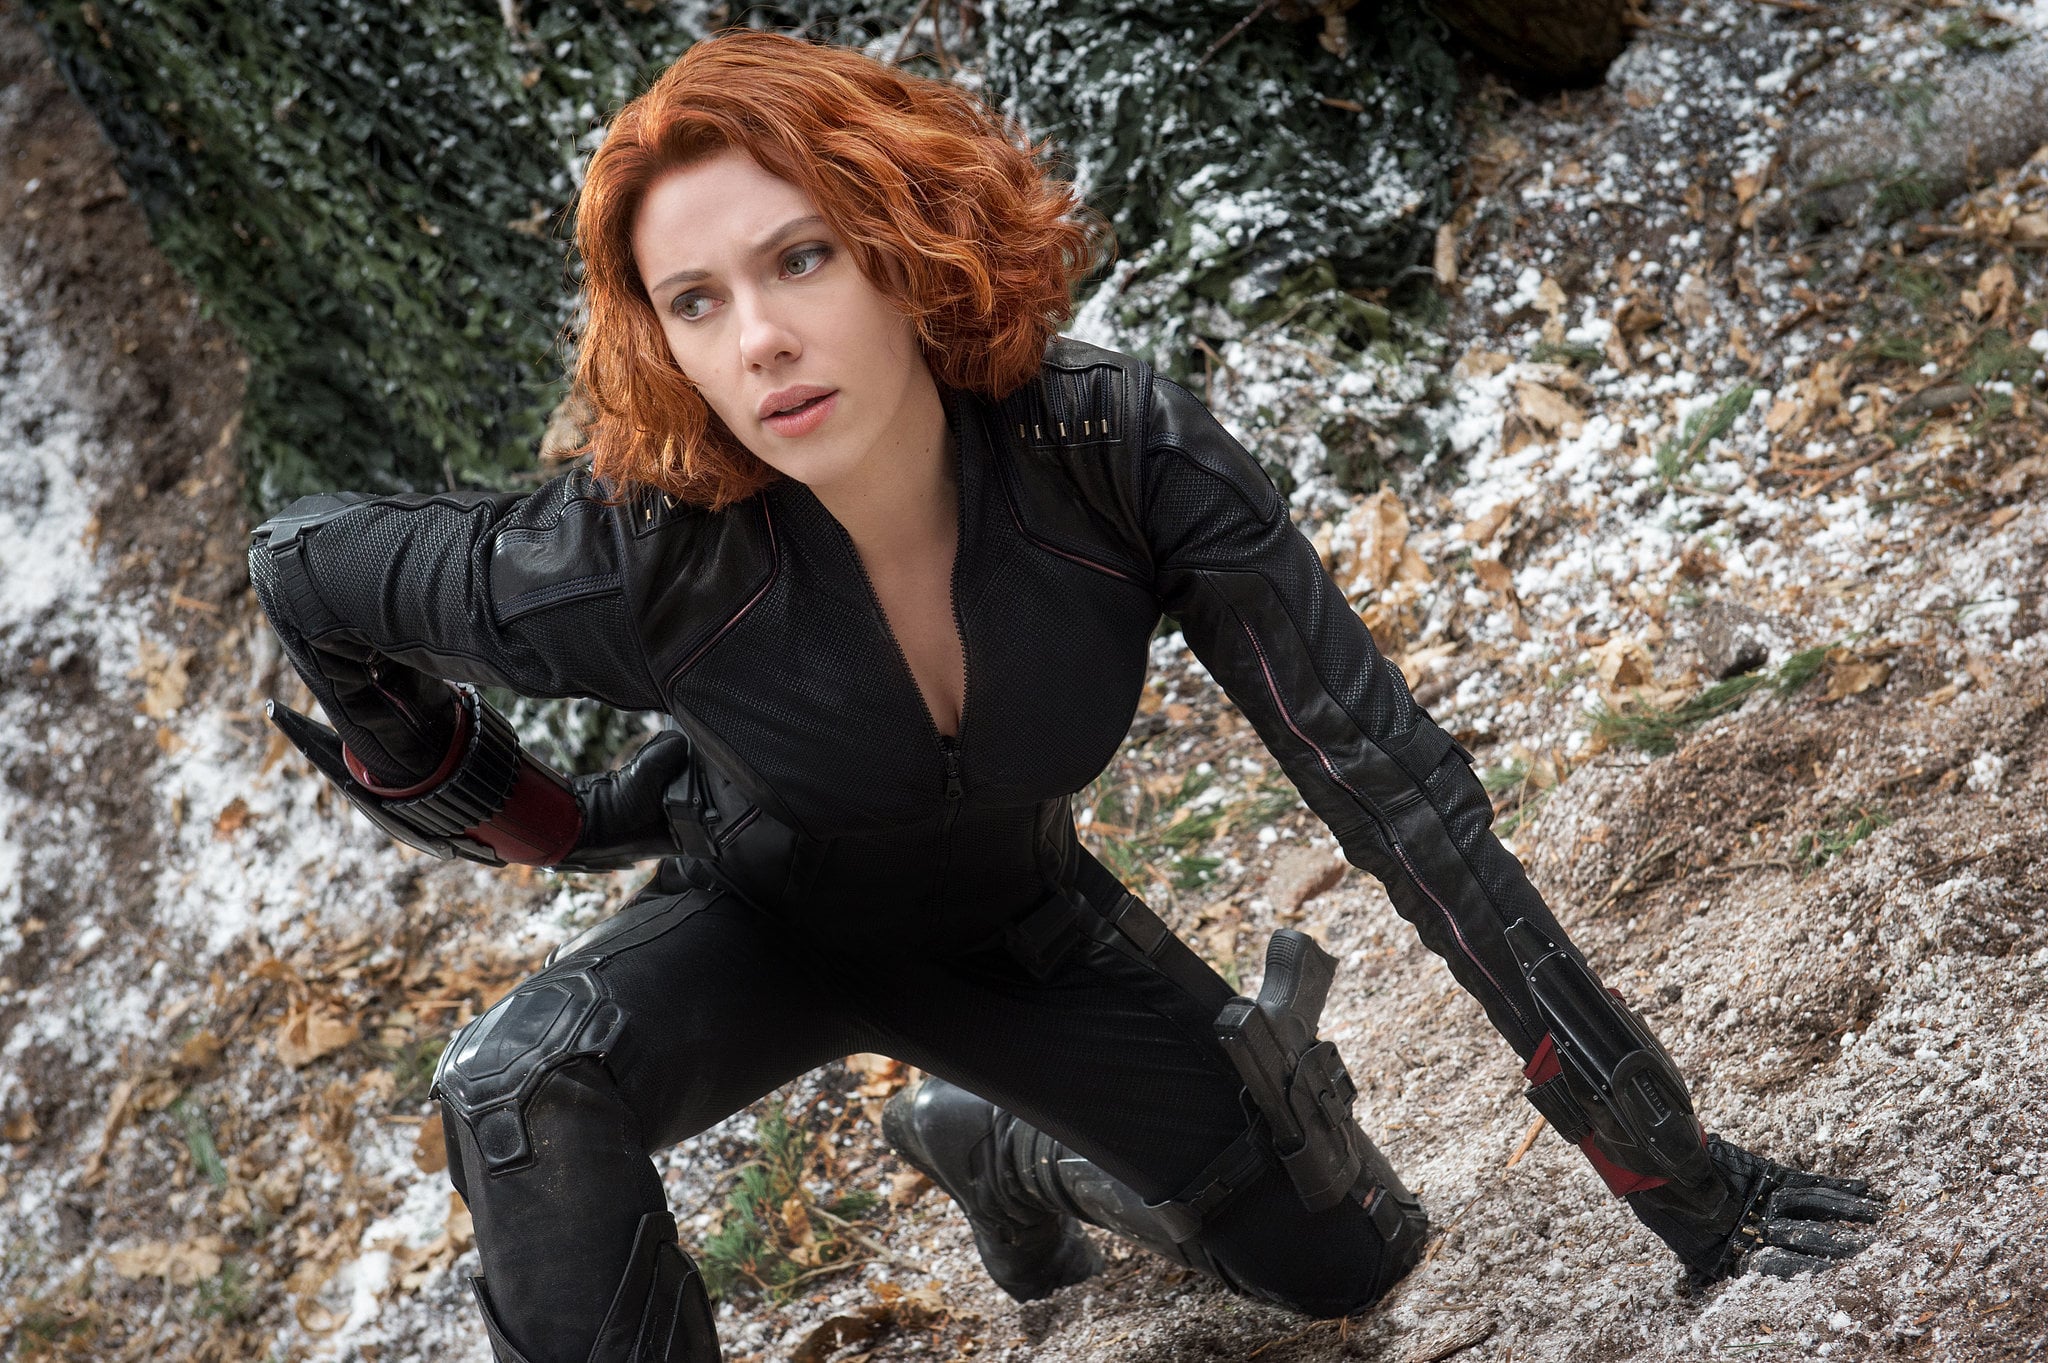 Natasha Romanoff in the first battle of Avengers: Age of Ultron.